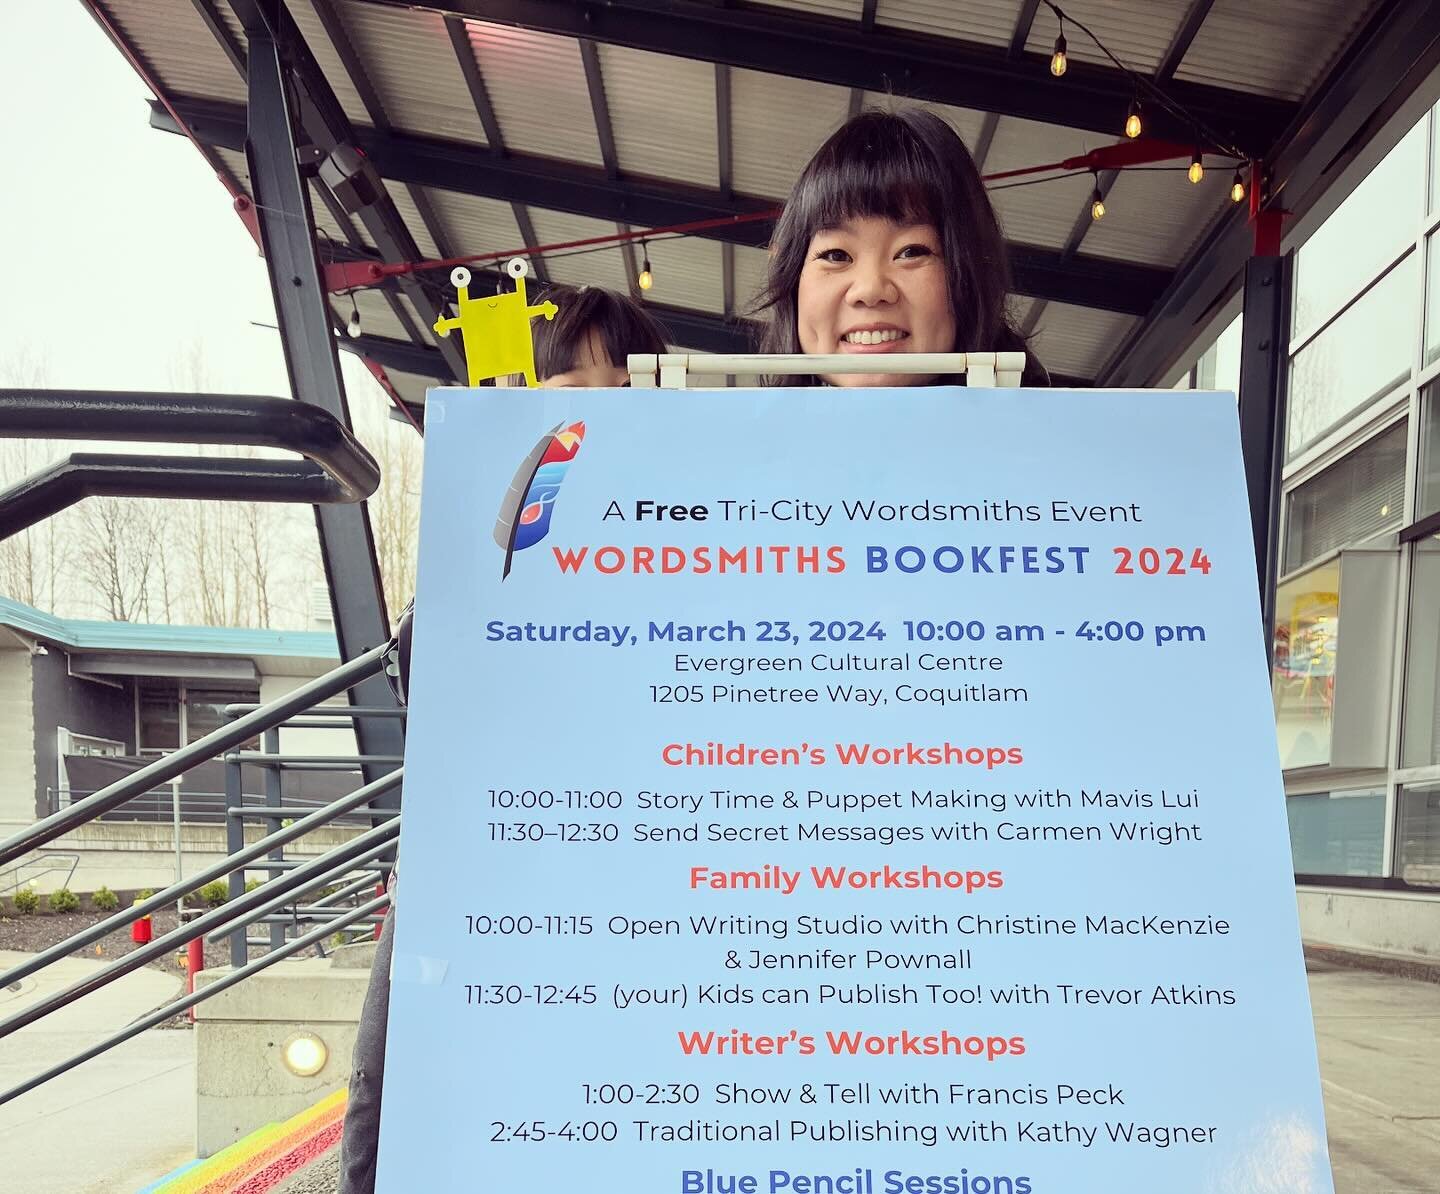 It was a wonderful workshop at Wordsmiths Bookfest 2024! Many thanks to all the lovely families who came and shared their creativity. Thank you @tri.city.wordsmiths for having us, we had a blast! 🩵

@tilburyhousepublishers 
#supportyourlocalbookstor